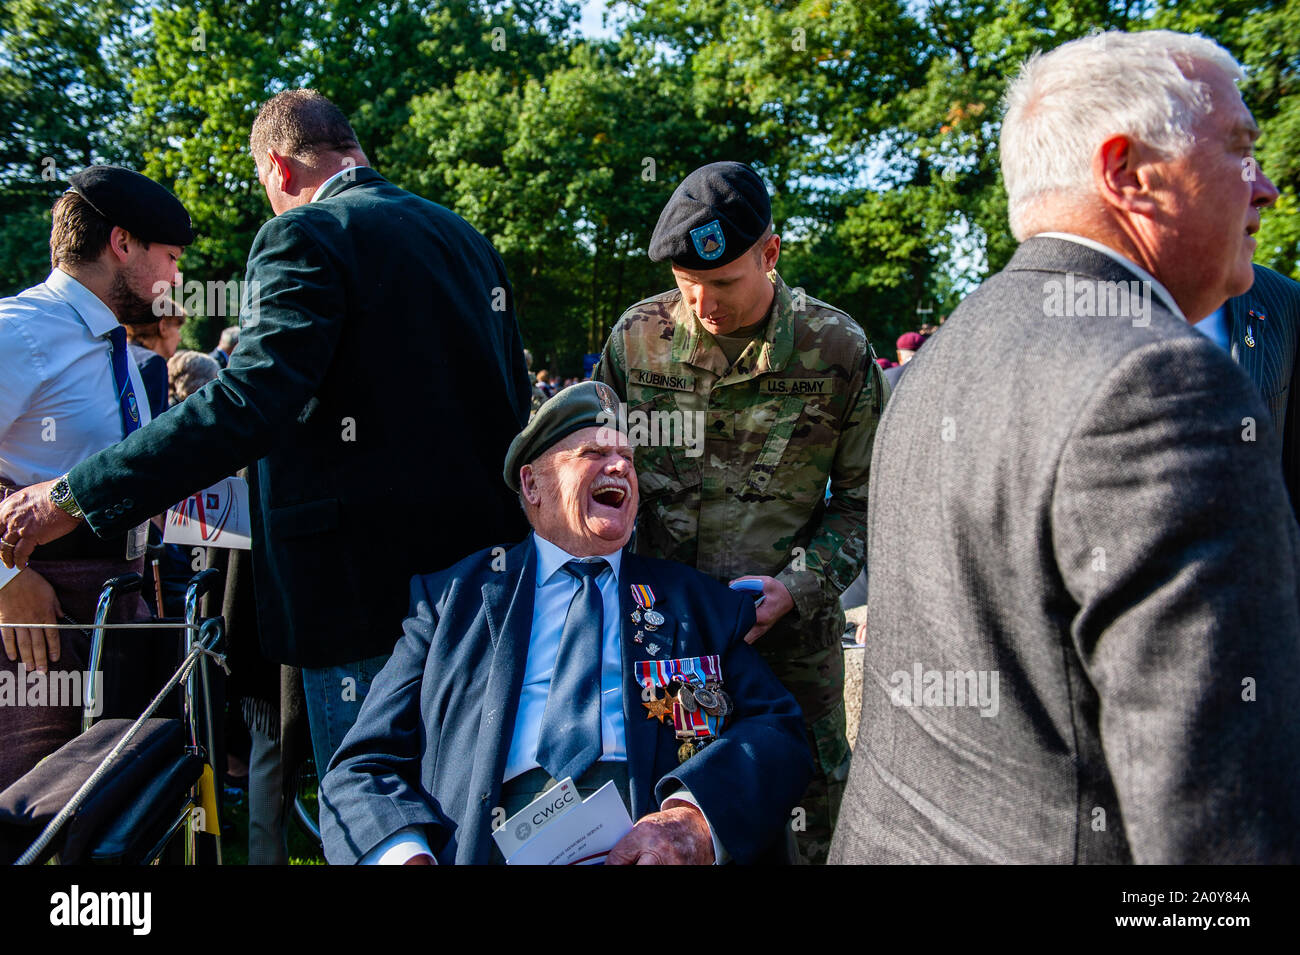 A war veteran having fun during the commemoration.At the Arnhem Oosterbeek War Cemetery, more than 1750 Allied soldiers were buried. As part of the commemorations for the 75th anniversary of Operation Market Garden, a memorial service was held in the presence of veterans, their relatives and thousands of people. A white stone arch was placed at each grave. On the field of honor is a 'Cross of sacrifice' made of Portland stone, on which a bronze sword is attached. Stock Photo